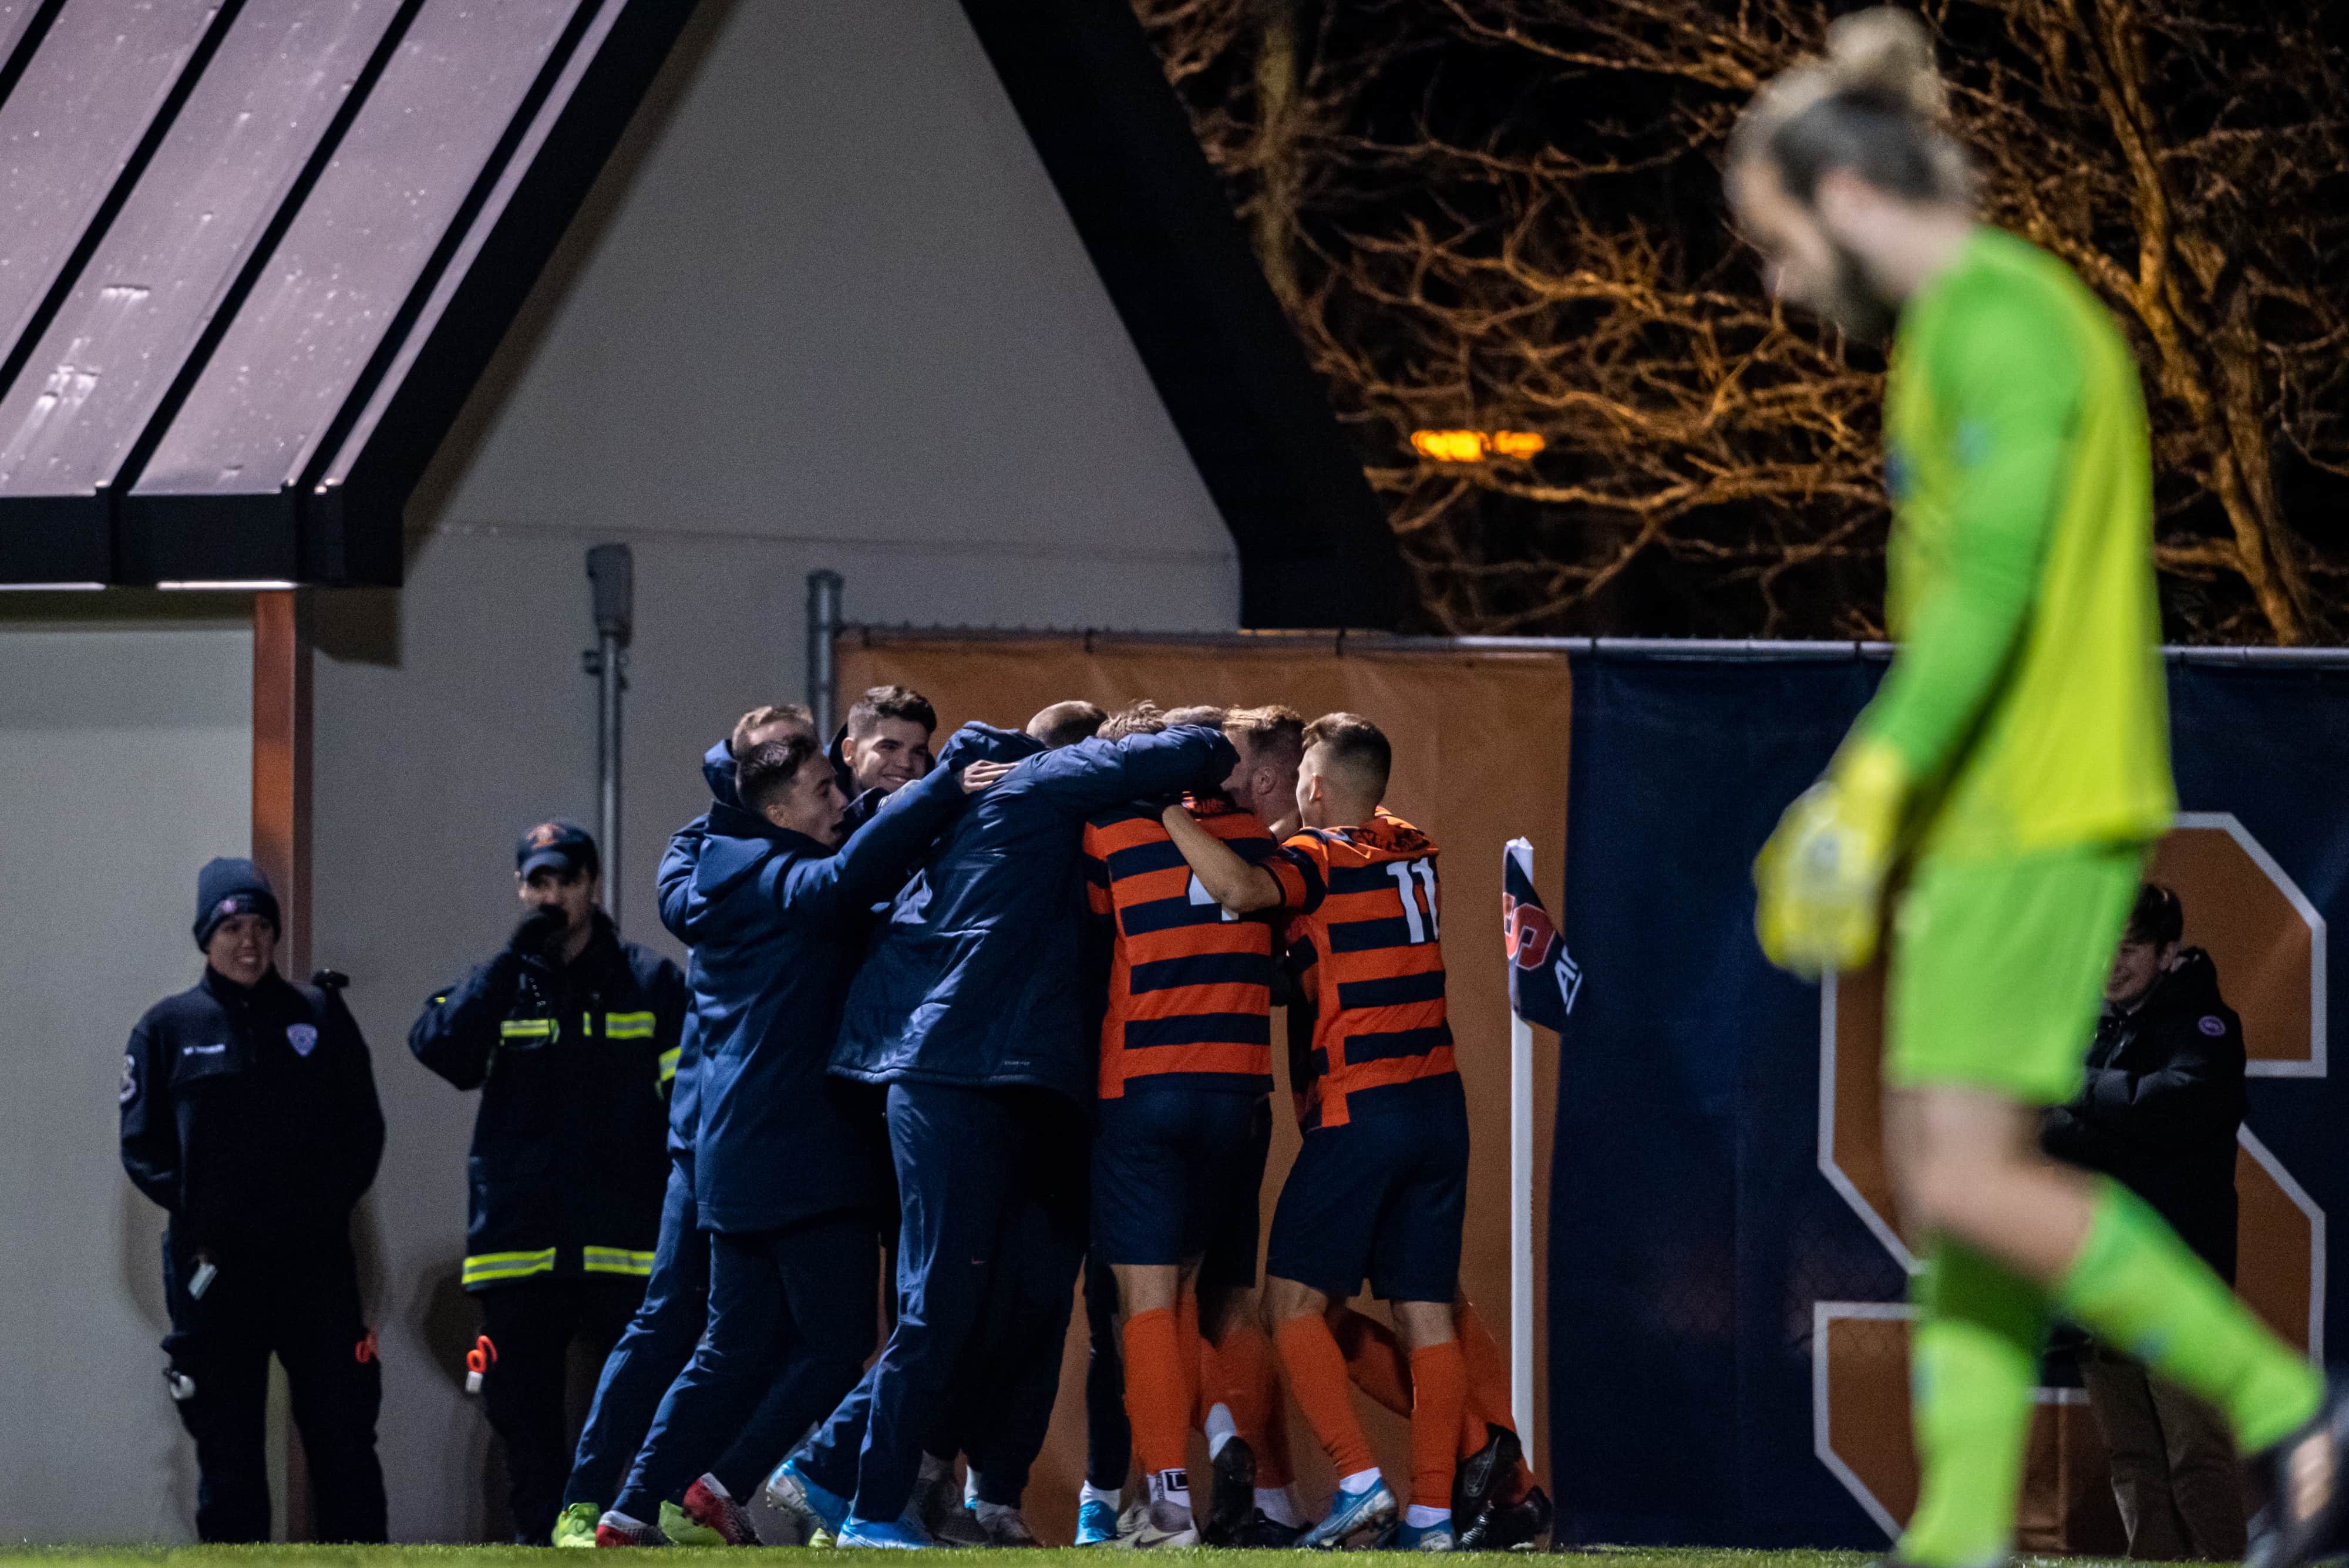 The Syracuse soccer team celebrates after scoring their third goal against Rhode Island during the first round of the NCAA Men’s Soccer Tournament. Syracuse defeated Rhode Island 3-2.